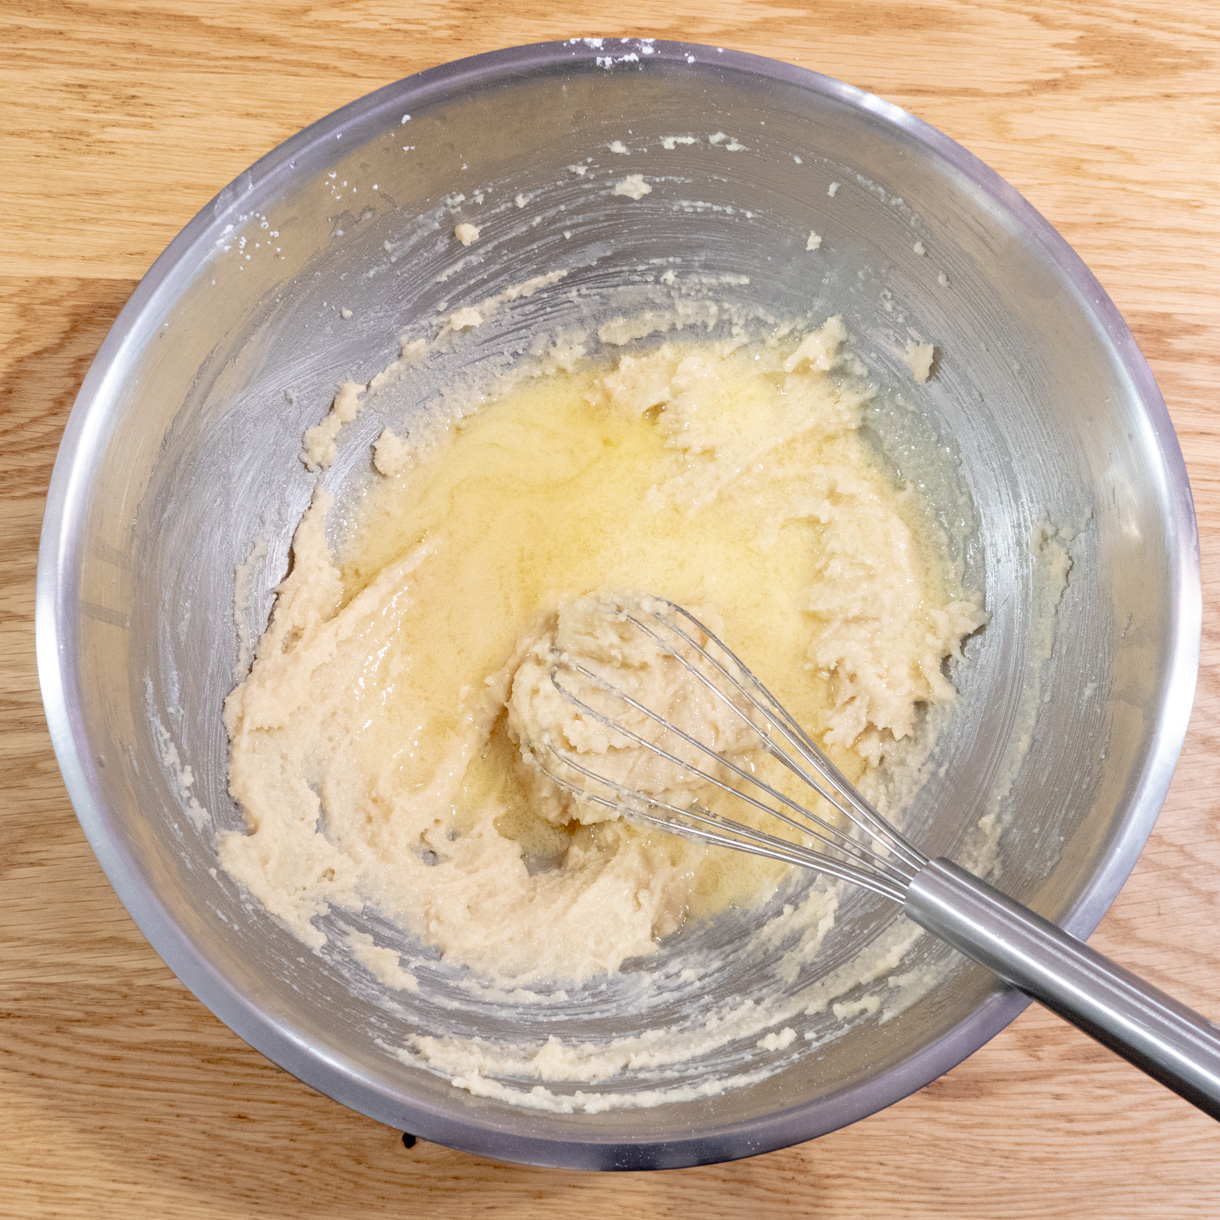 Melted butter, rum and almond extract being mixed into the stiff batter;